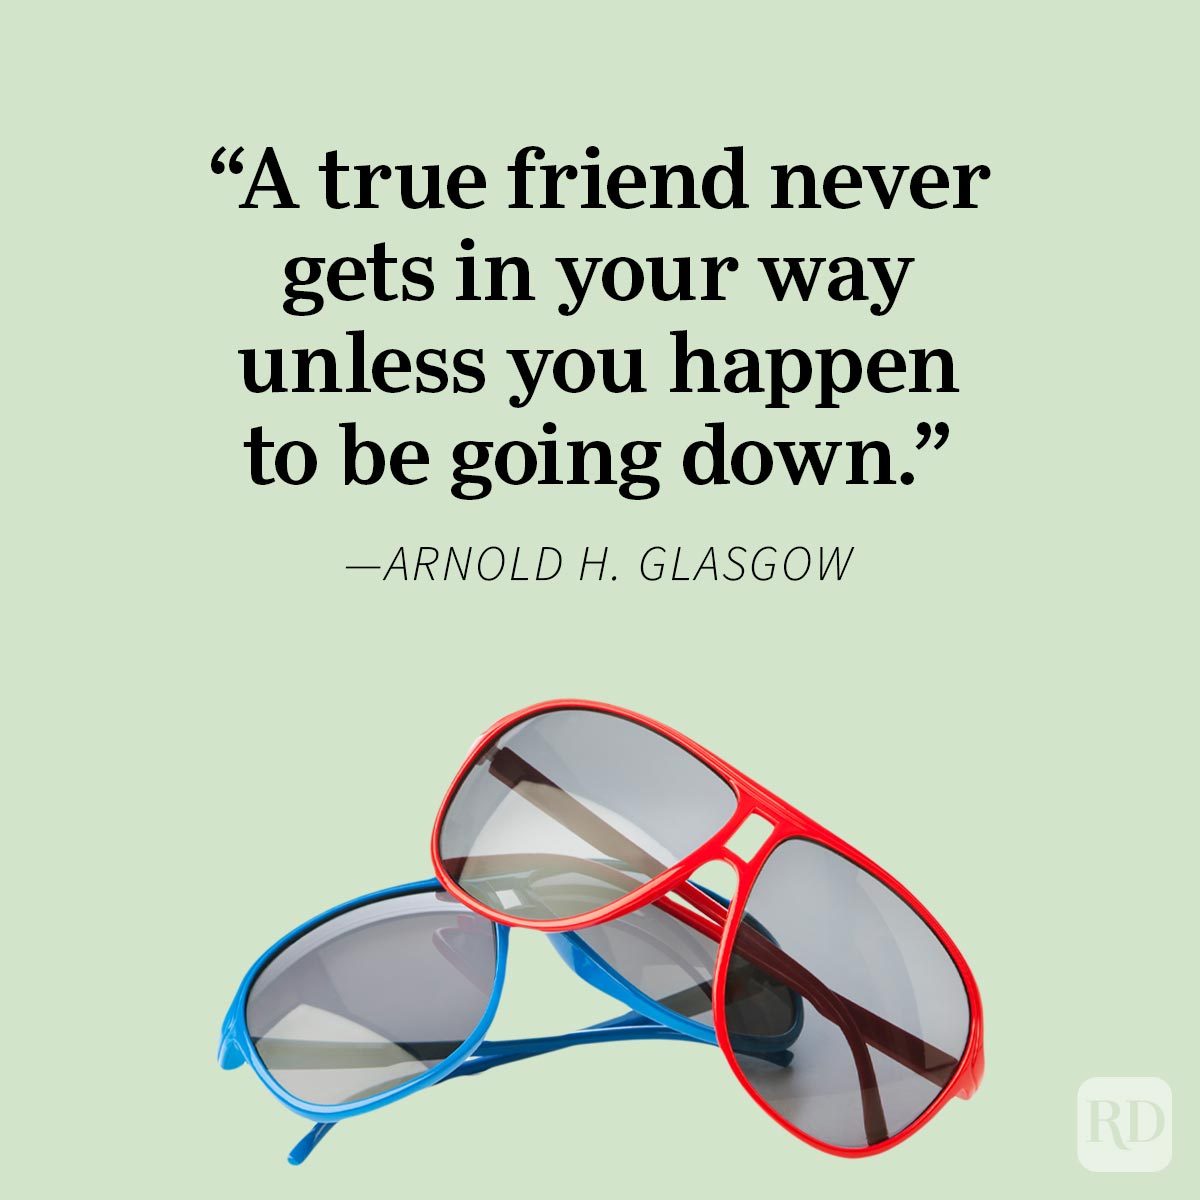 Friendship Quotes To Share With Your Bestie Arnold H Glasgow, red and blue sunglasses, green